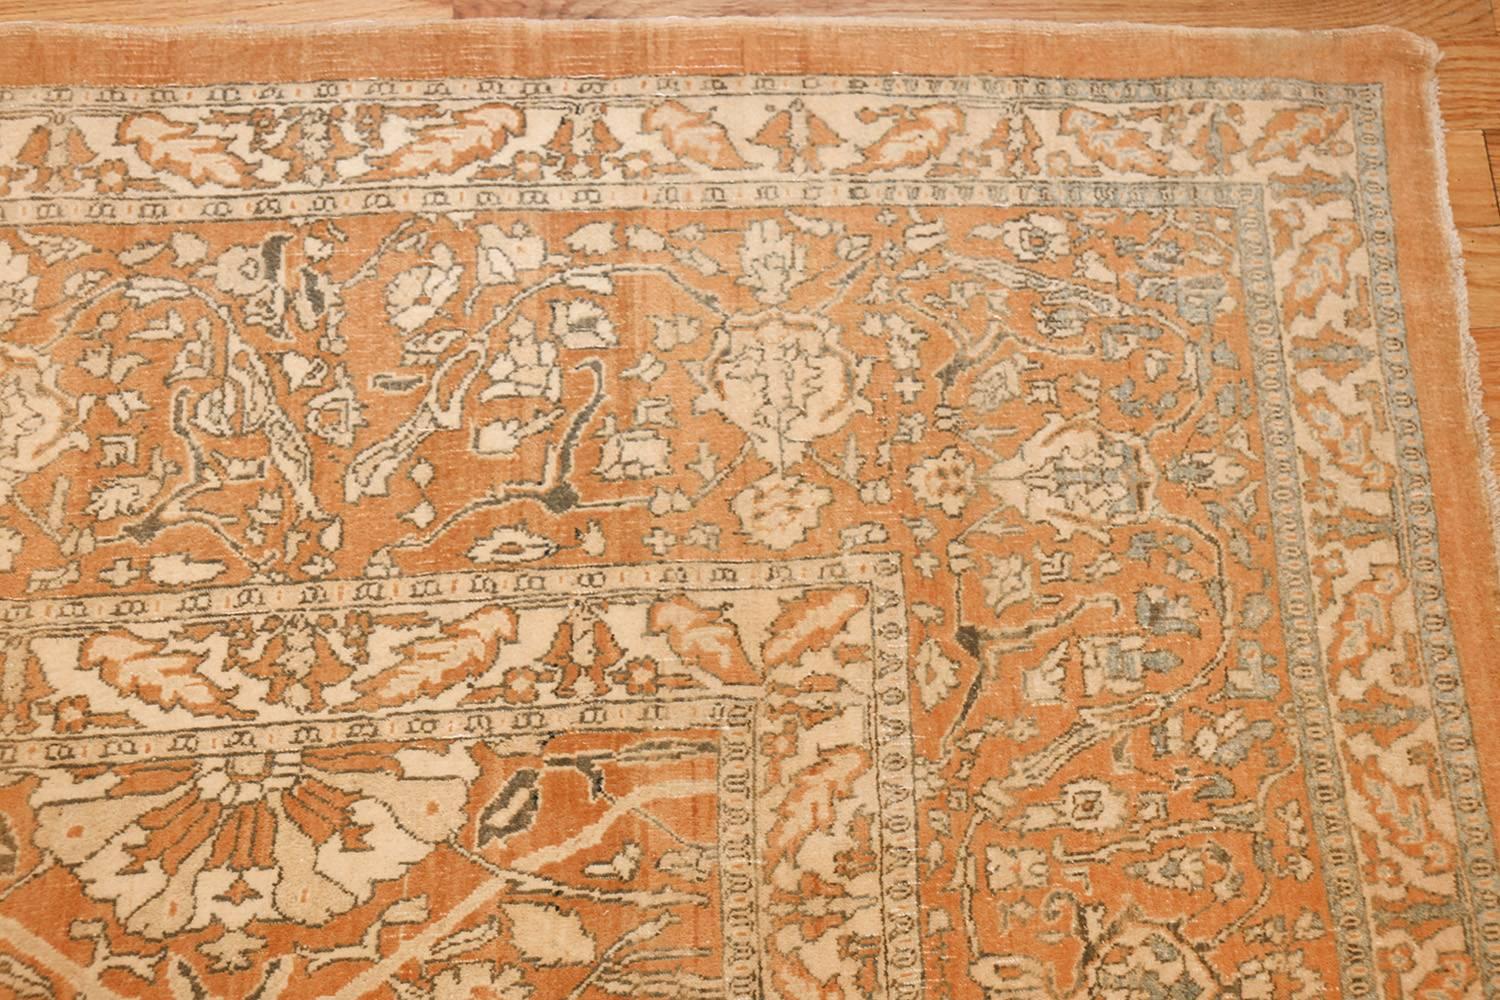 This magnificently decorative antique Oriental Agra carpet has an opulent floral array that literally dances across the field.

Beautiful Decorative Vase Design Antique Oriental Agra Rug, Country of Origin: India, circa early 20th century – An